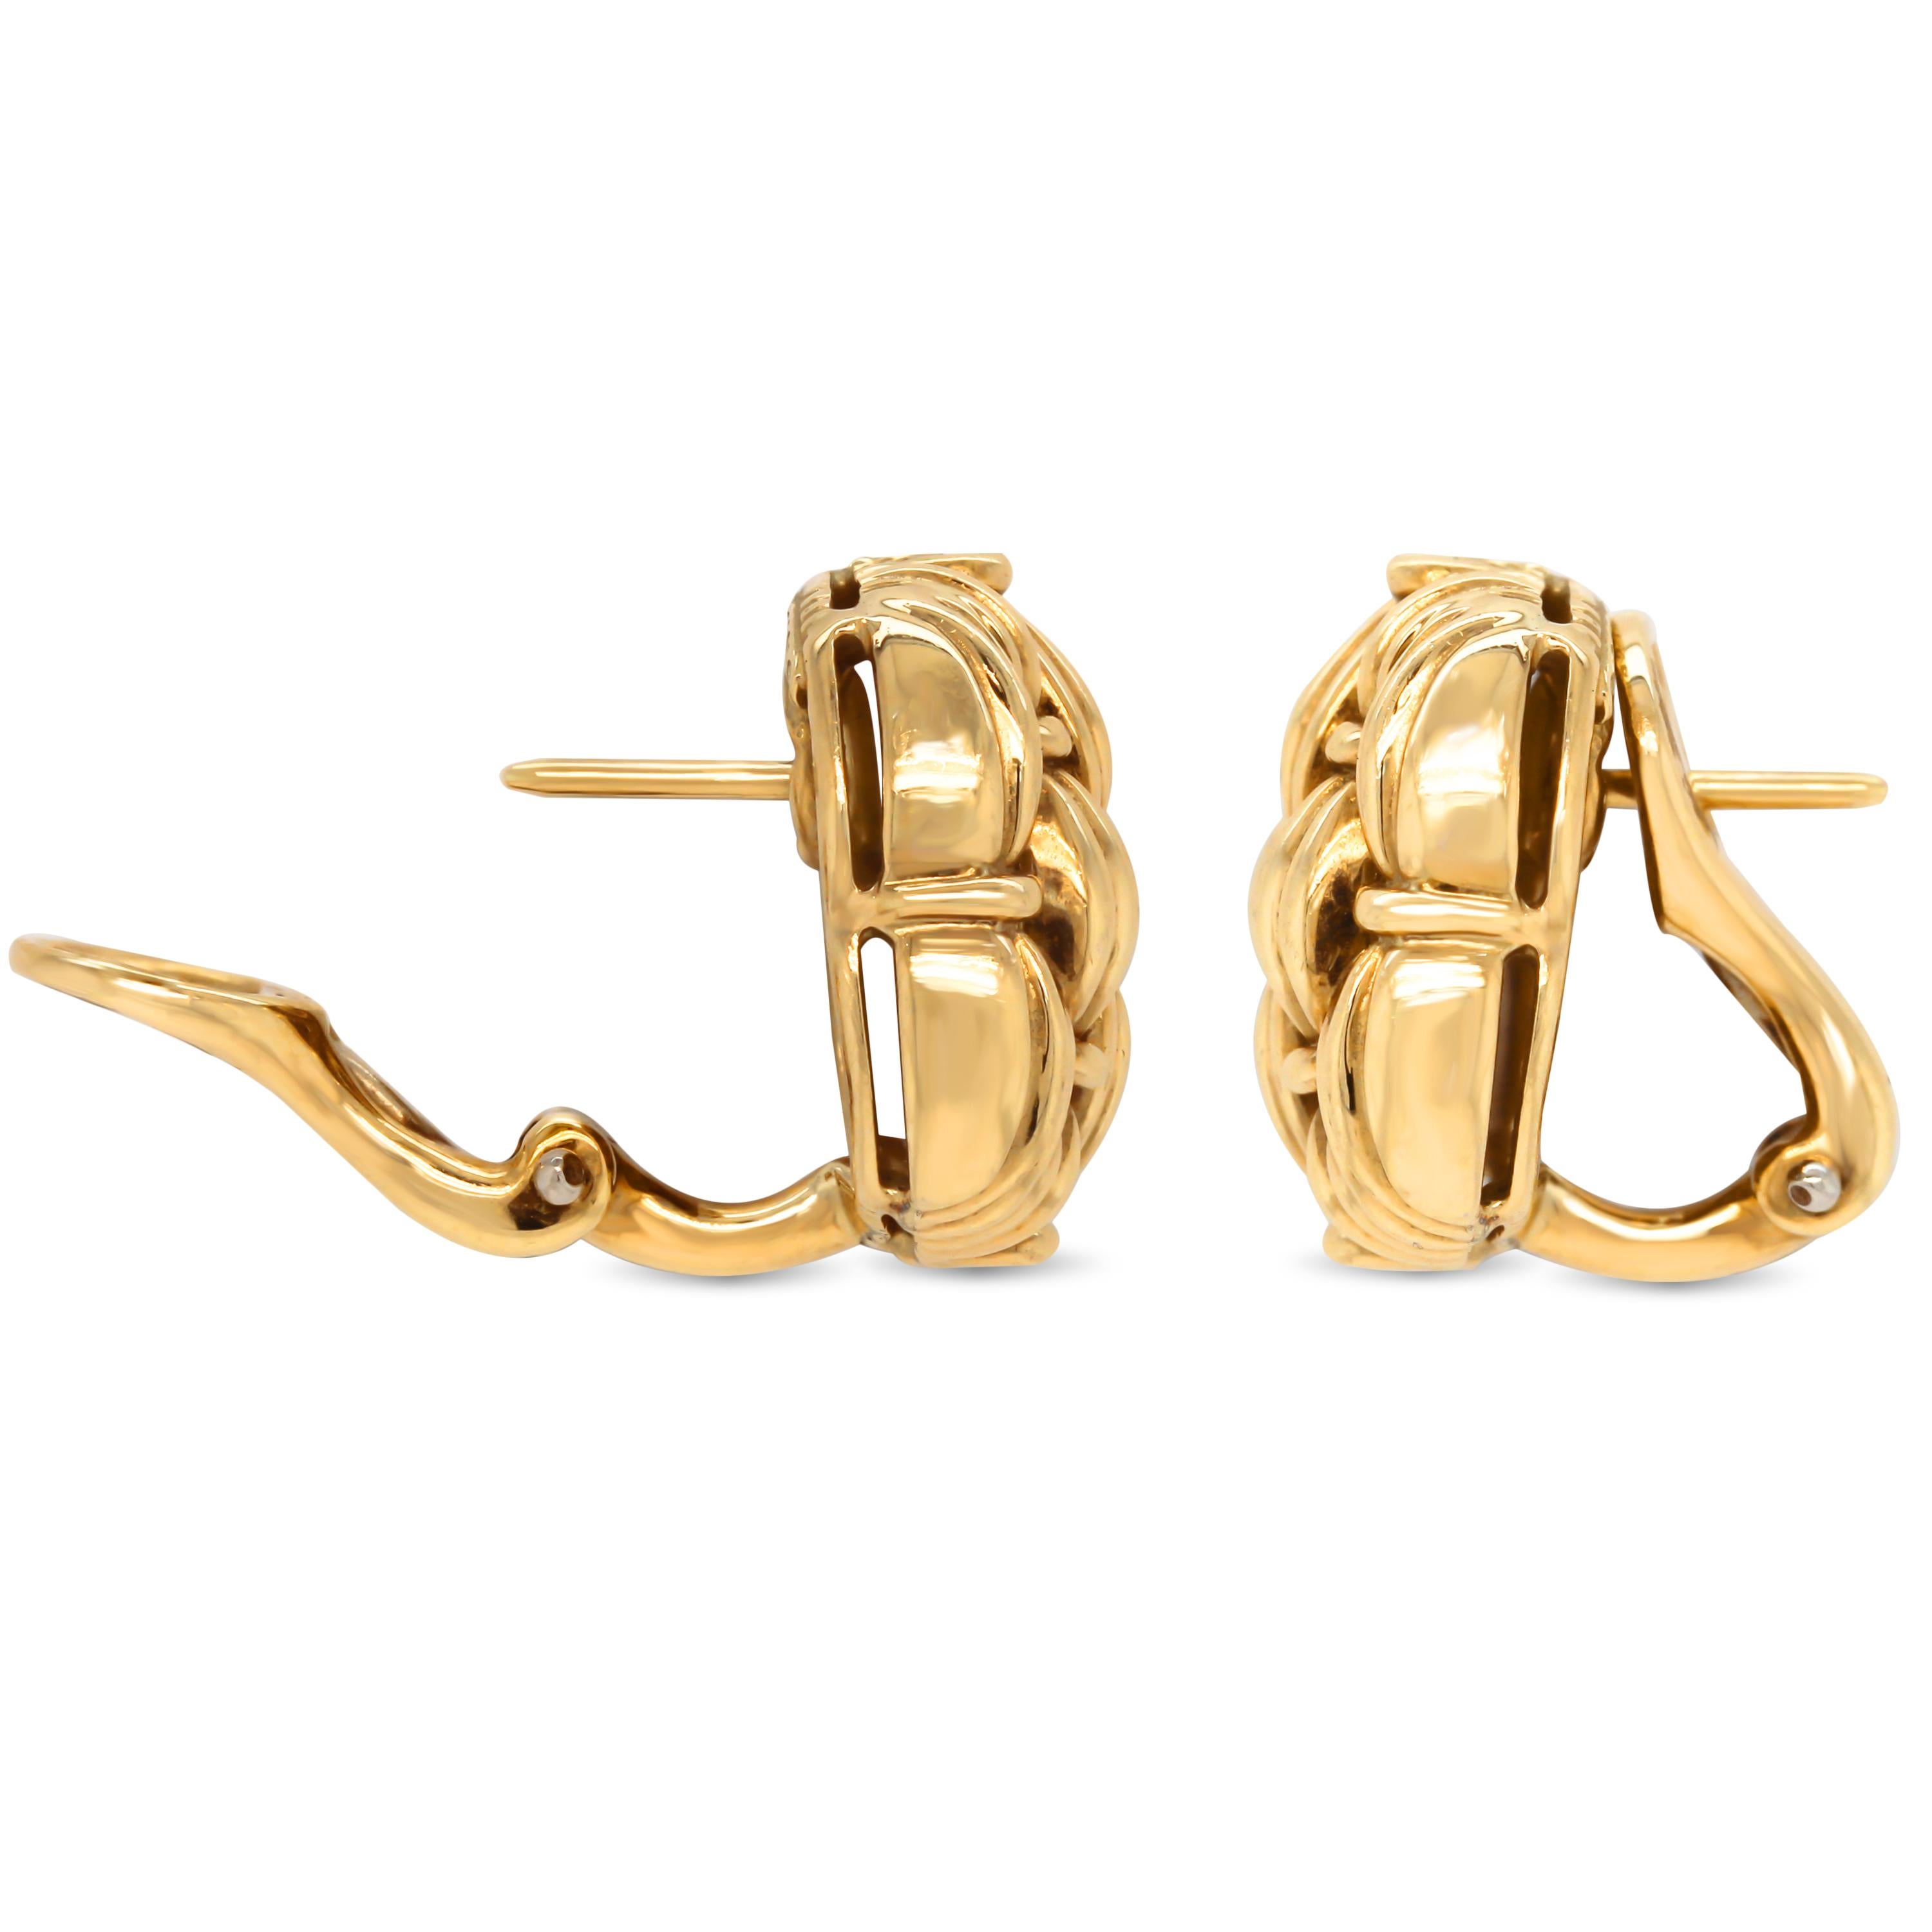 Tiffany & Co 18K Yellow Gold Earrings

Earrings have post-omega backs.

0.60 inch length by 0.50 inch in width.

Signed Tiffany & Co